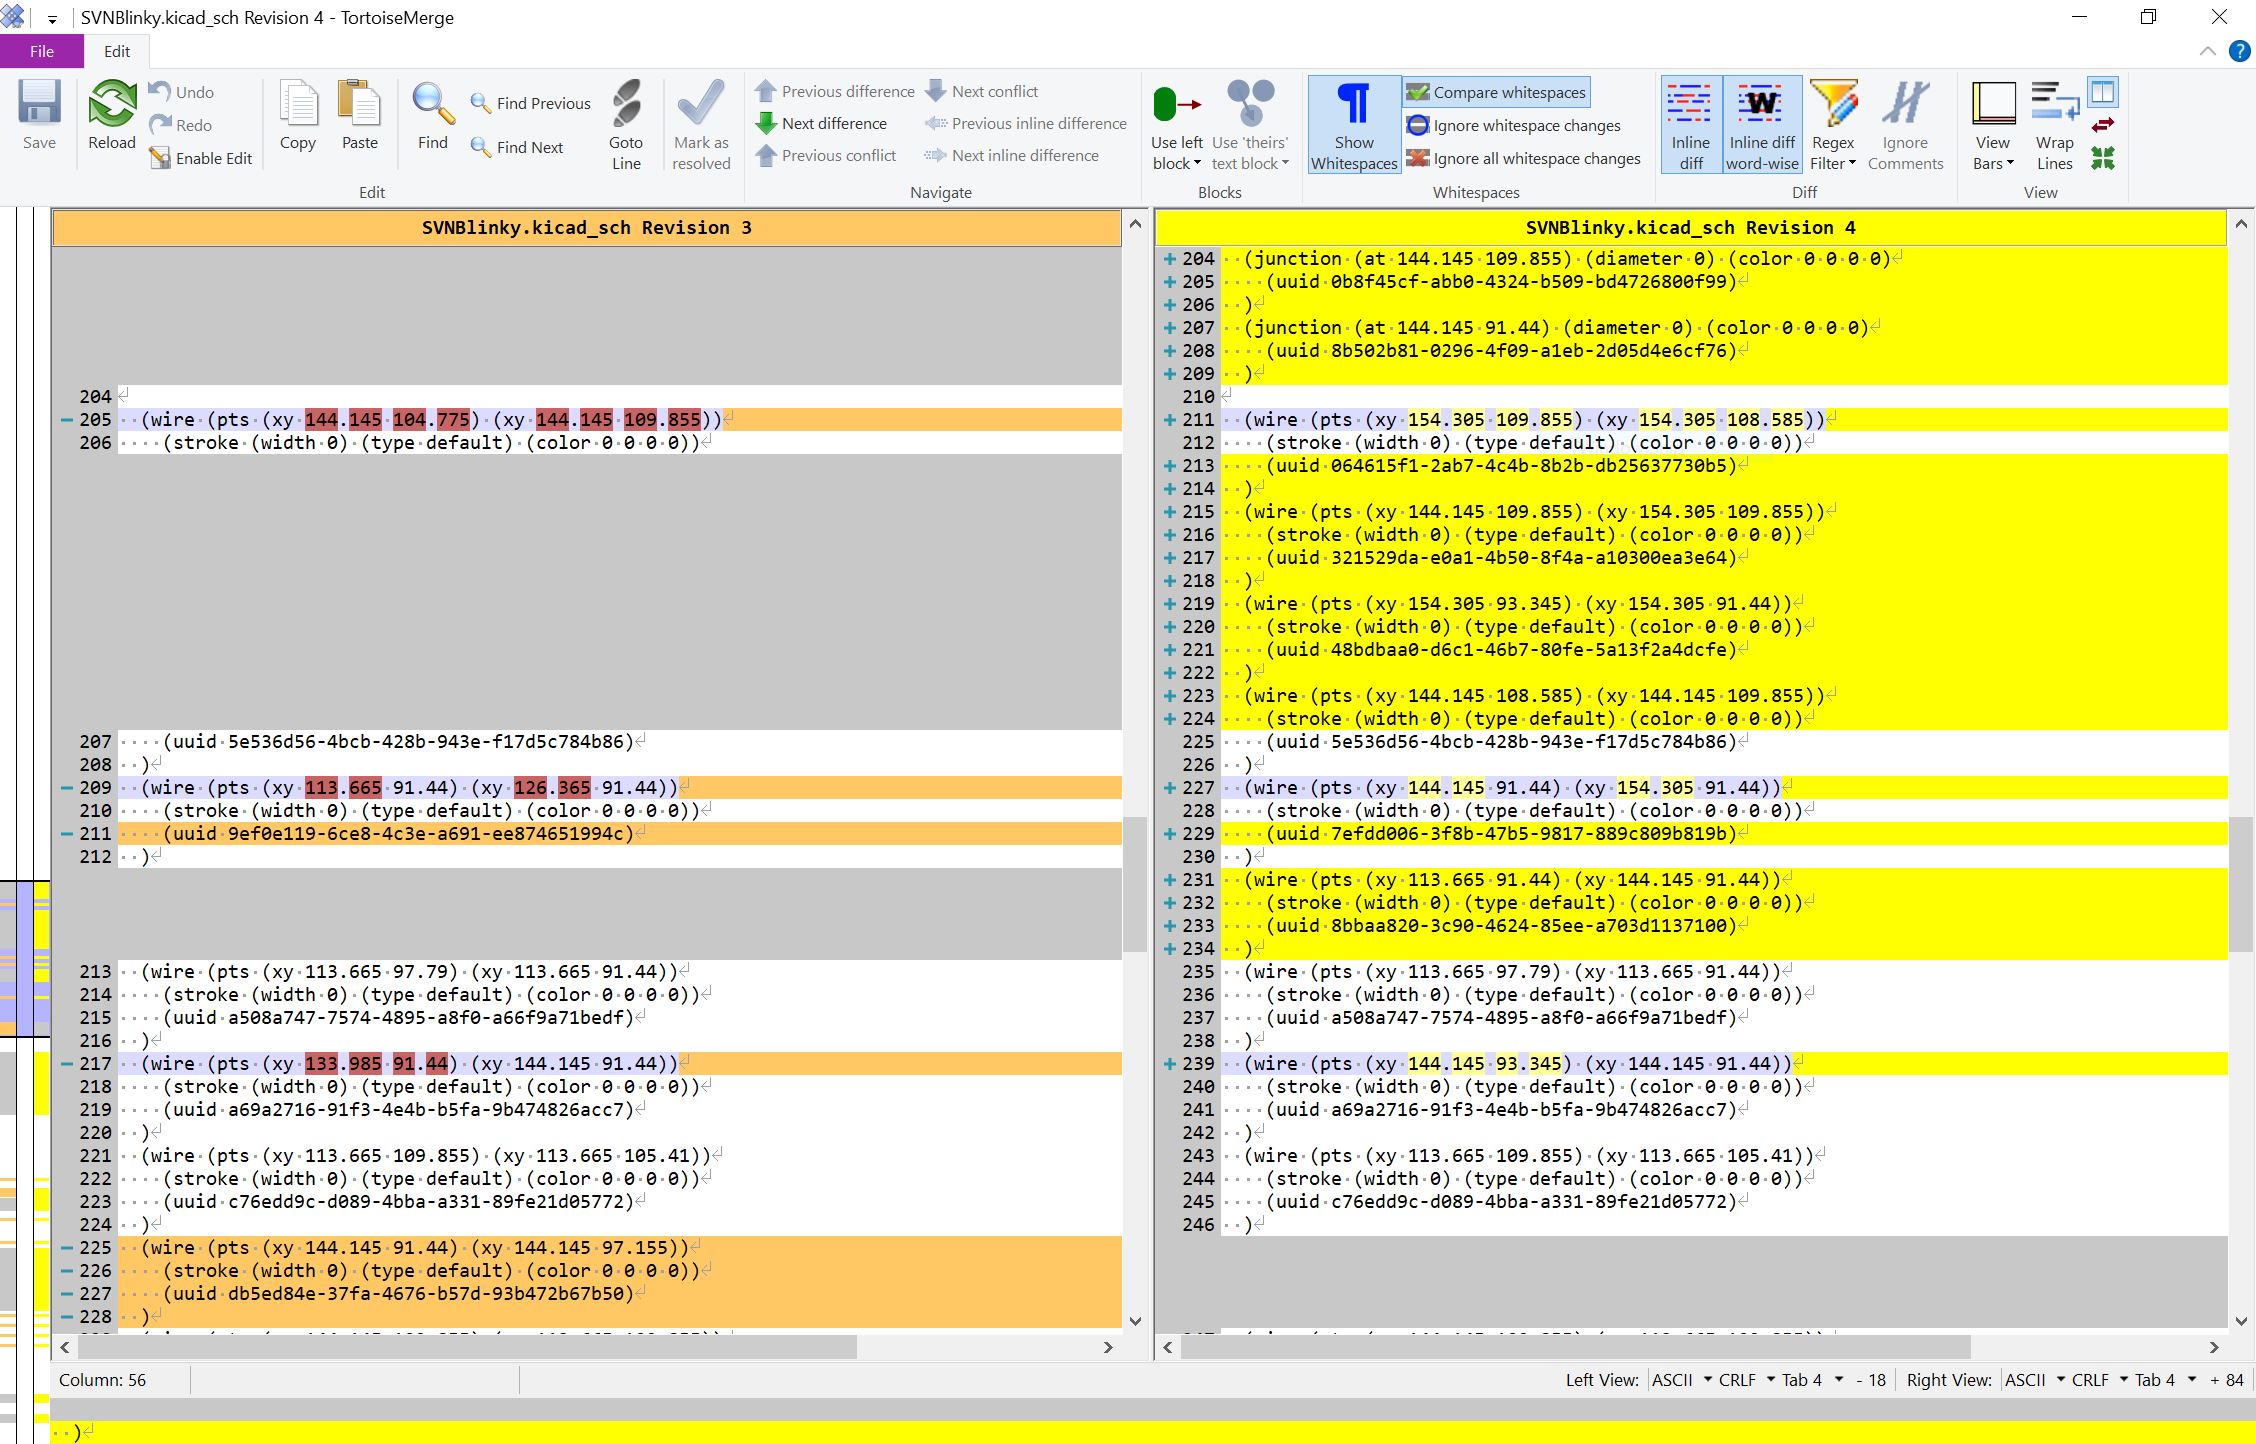 A screenshot of TortoiseSVN's diff screen showing a lot of changed lines between revisions.